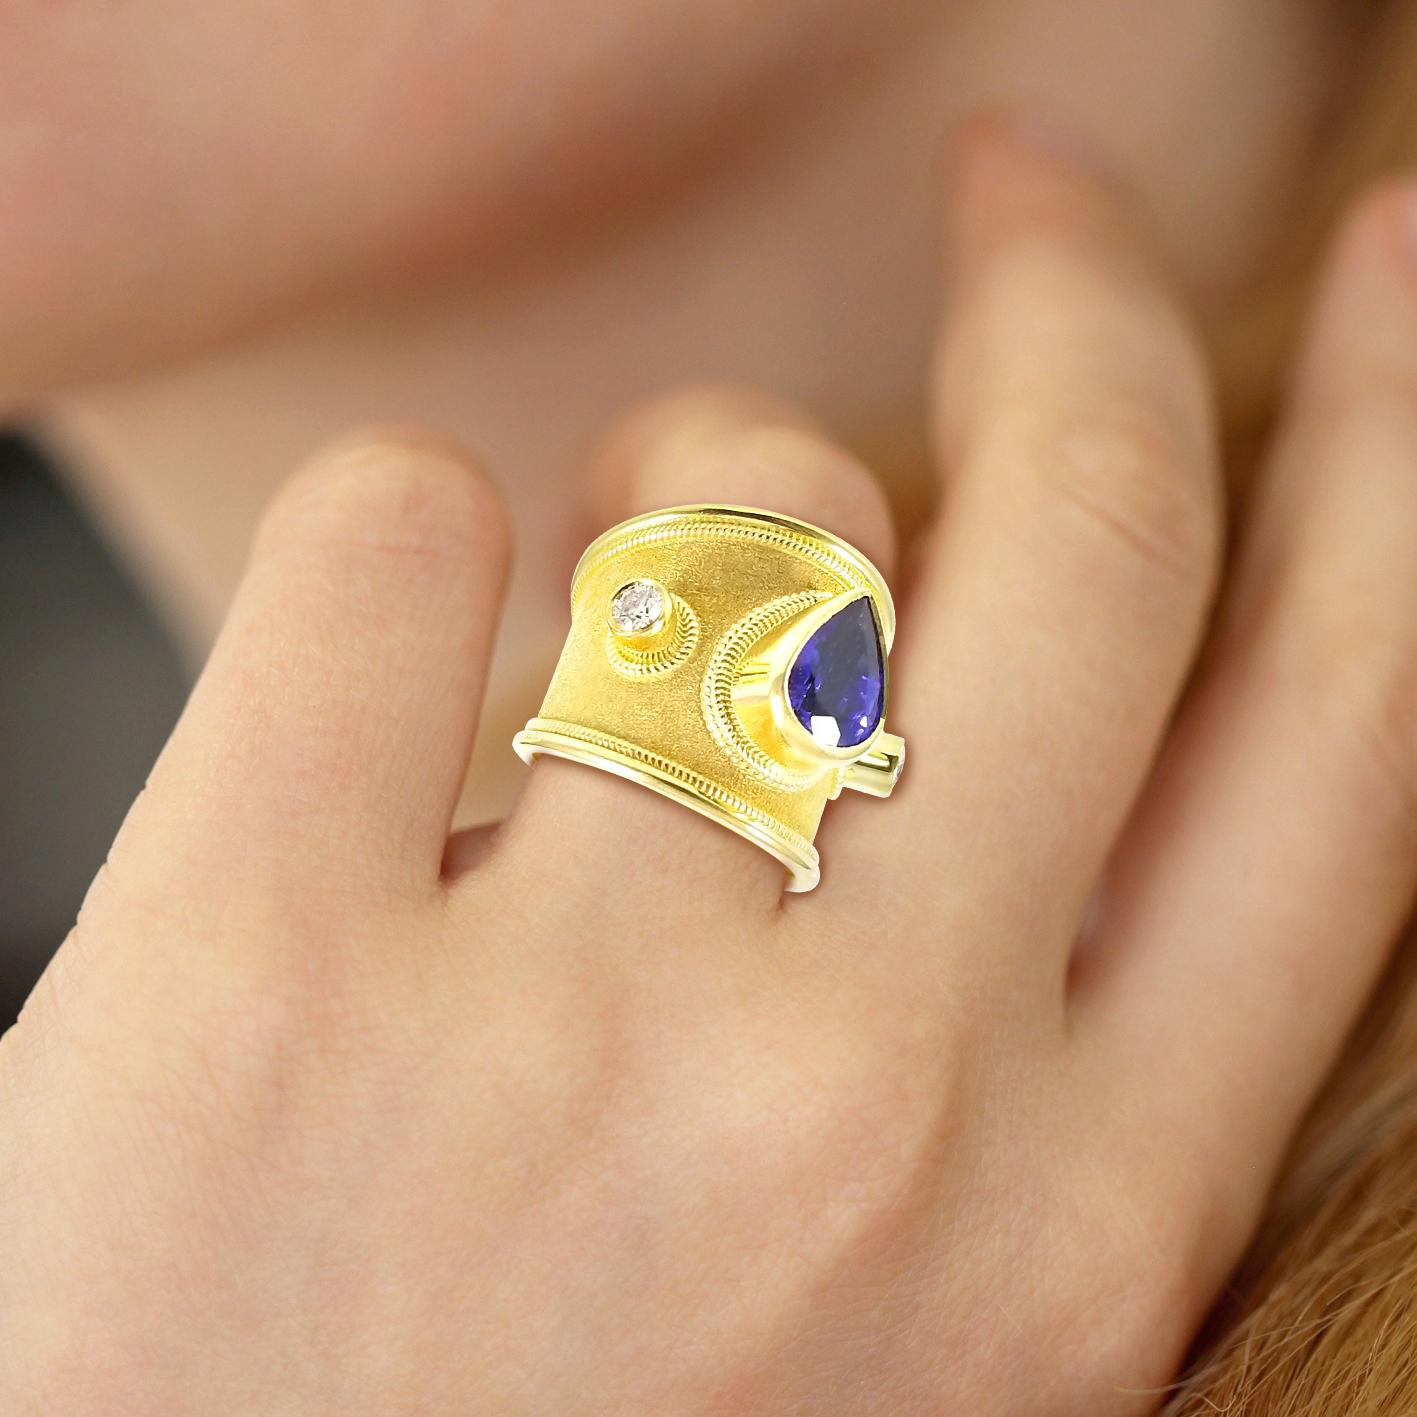 Unique S.Georgios designer 18 Karat Solid Yellow Gold Ring all handmade with the Byzantine granulation workmanship and a stunning velvet background. The Ring has 1 center Pear Shape Tanzanite total weight of 3,20 Carats and 2 Brilliant cut White